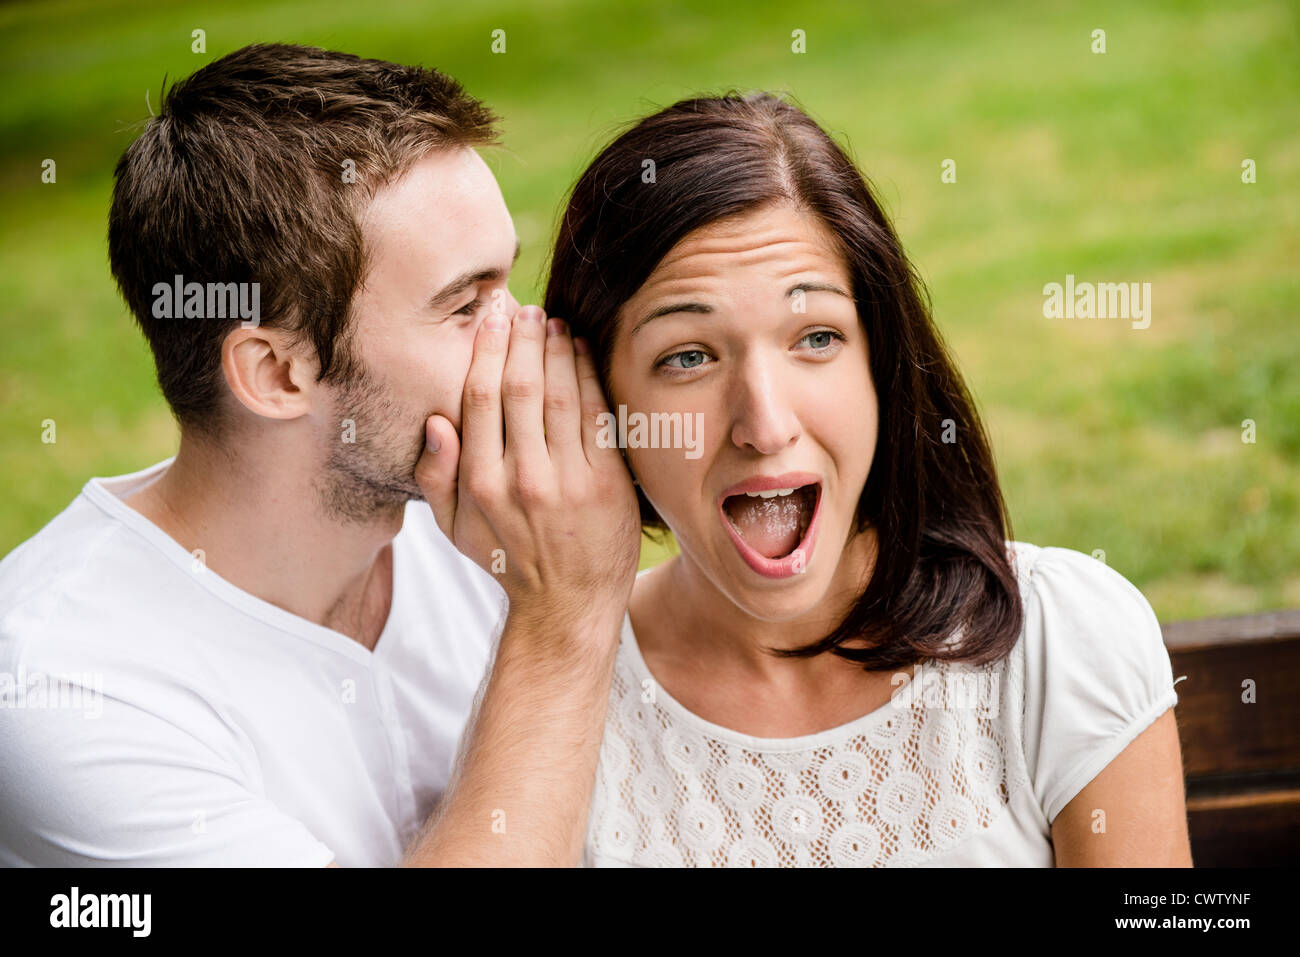 Young man whispering to woman (girlfriend) - surprise expression Stock Photo